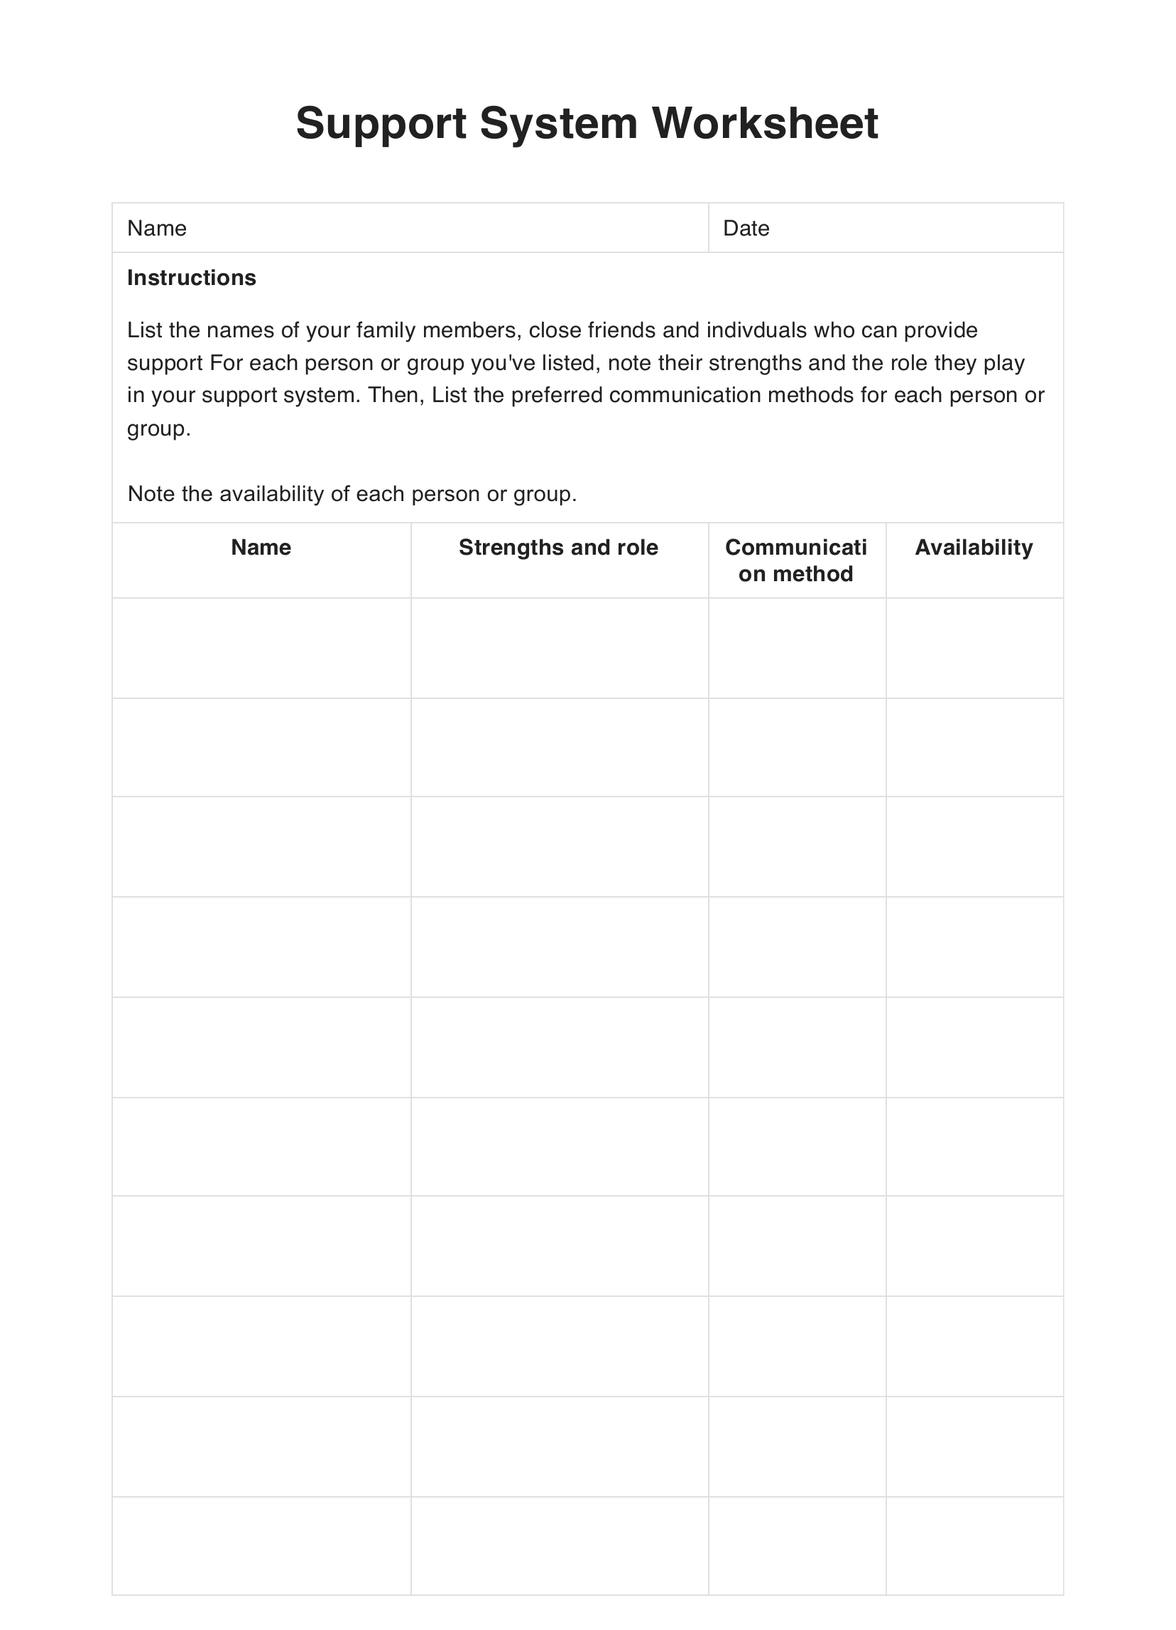 Support System Worksheets PDF Example